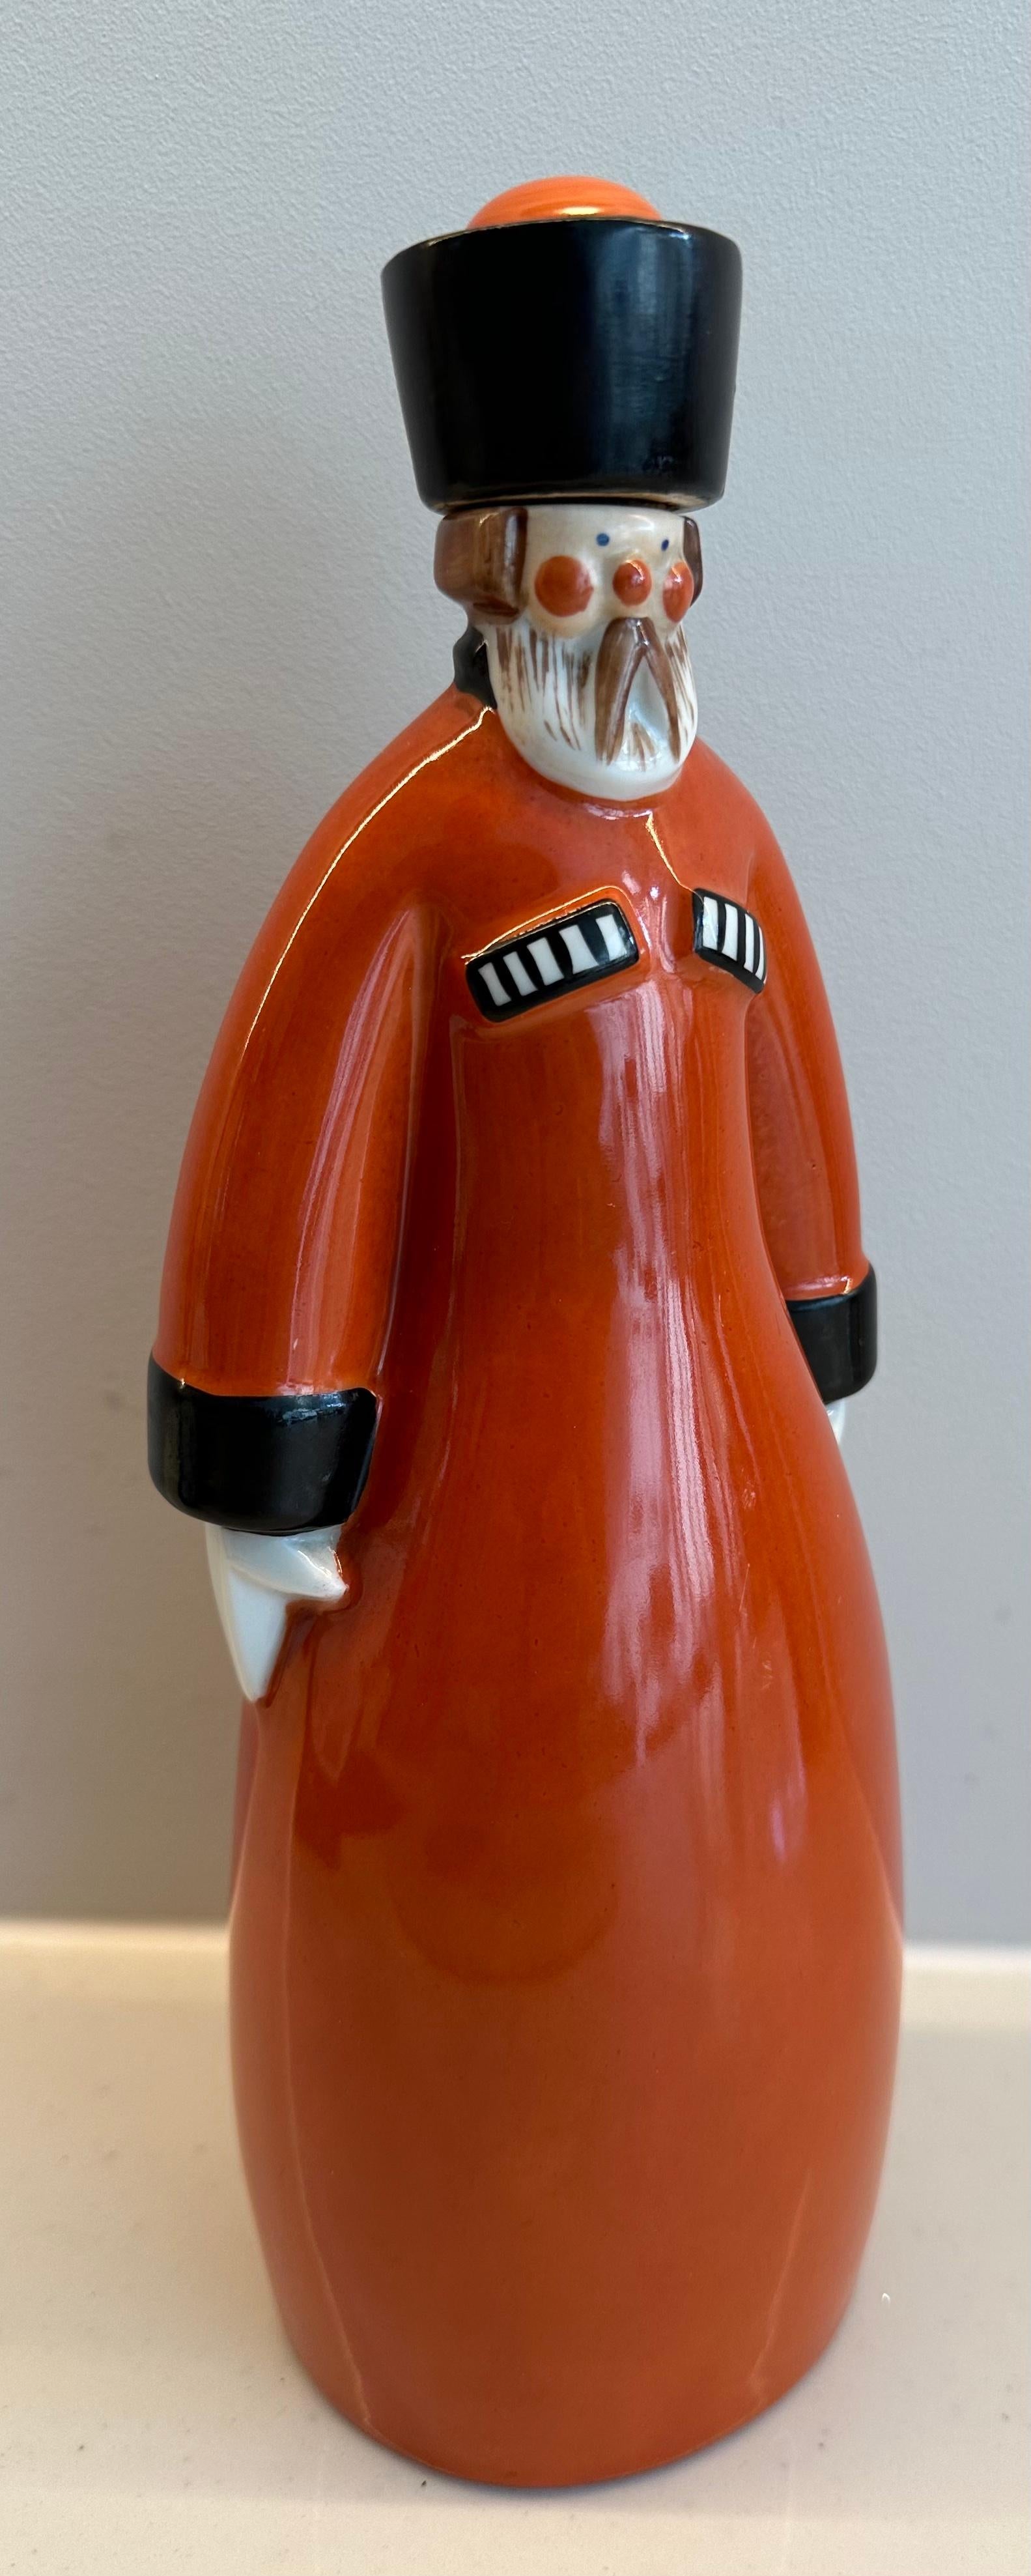 Art Deco 1930s French “Curacao” Figural Russian Soldier Flask by Robj Paris For Sale 5